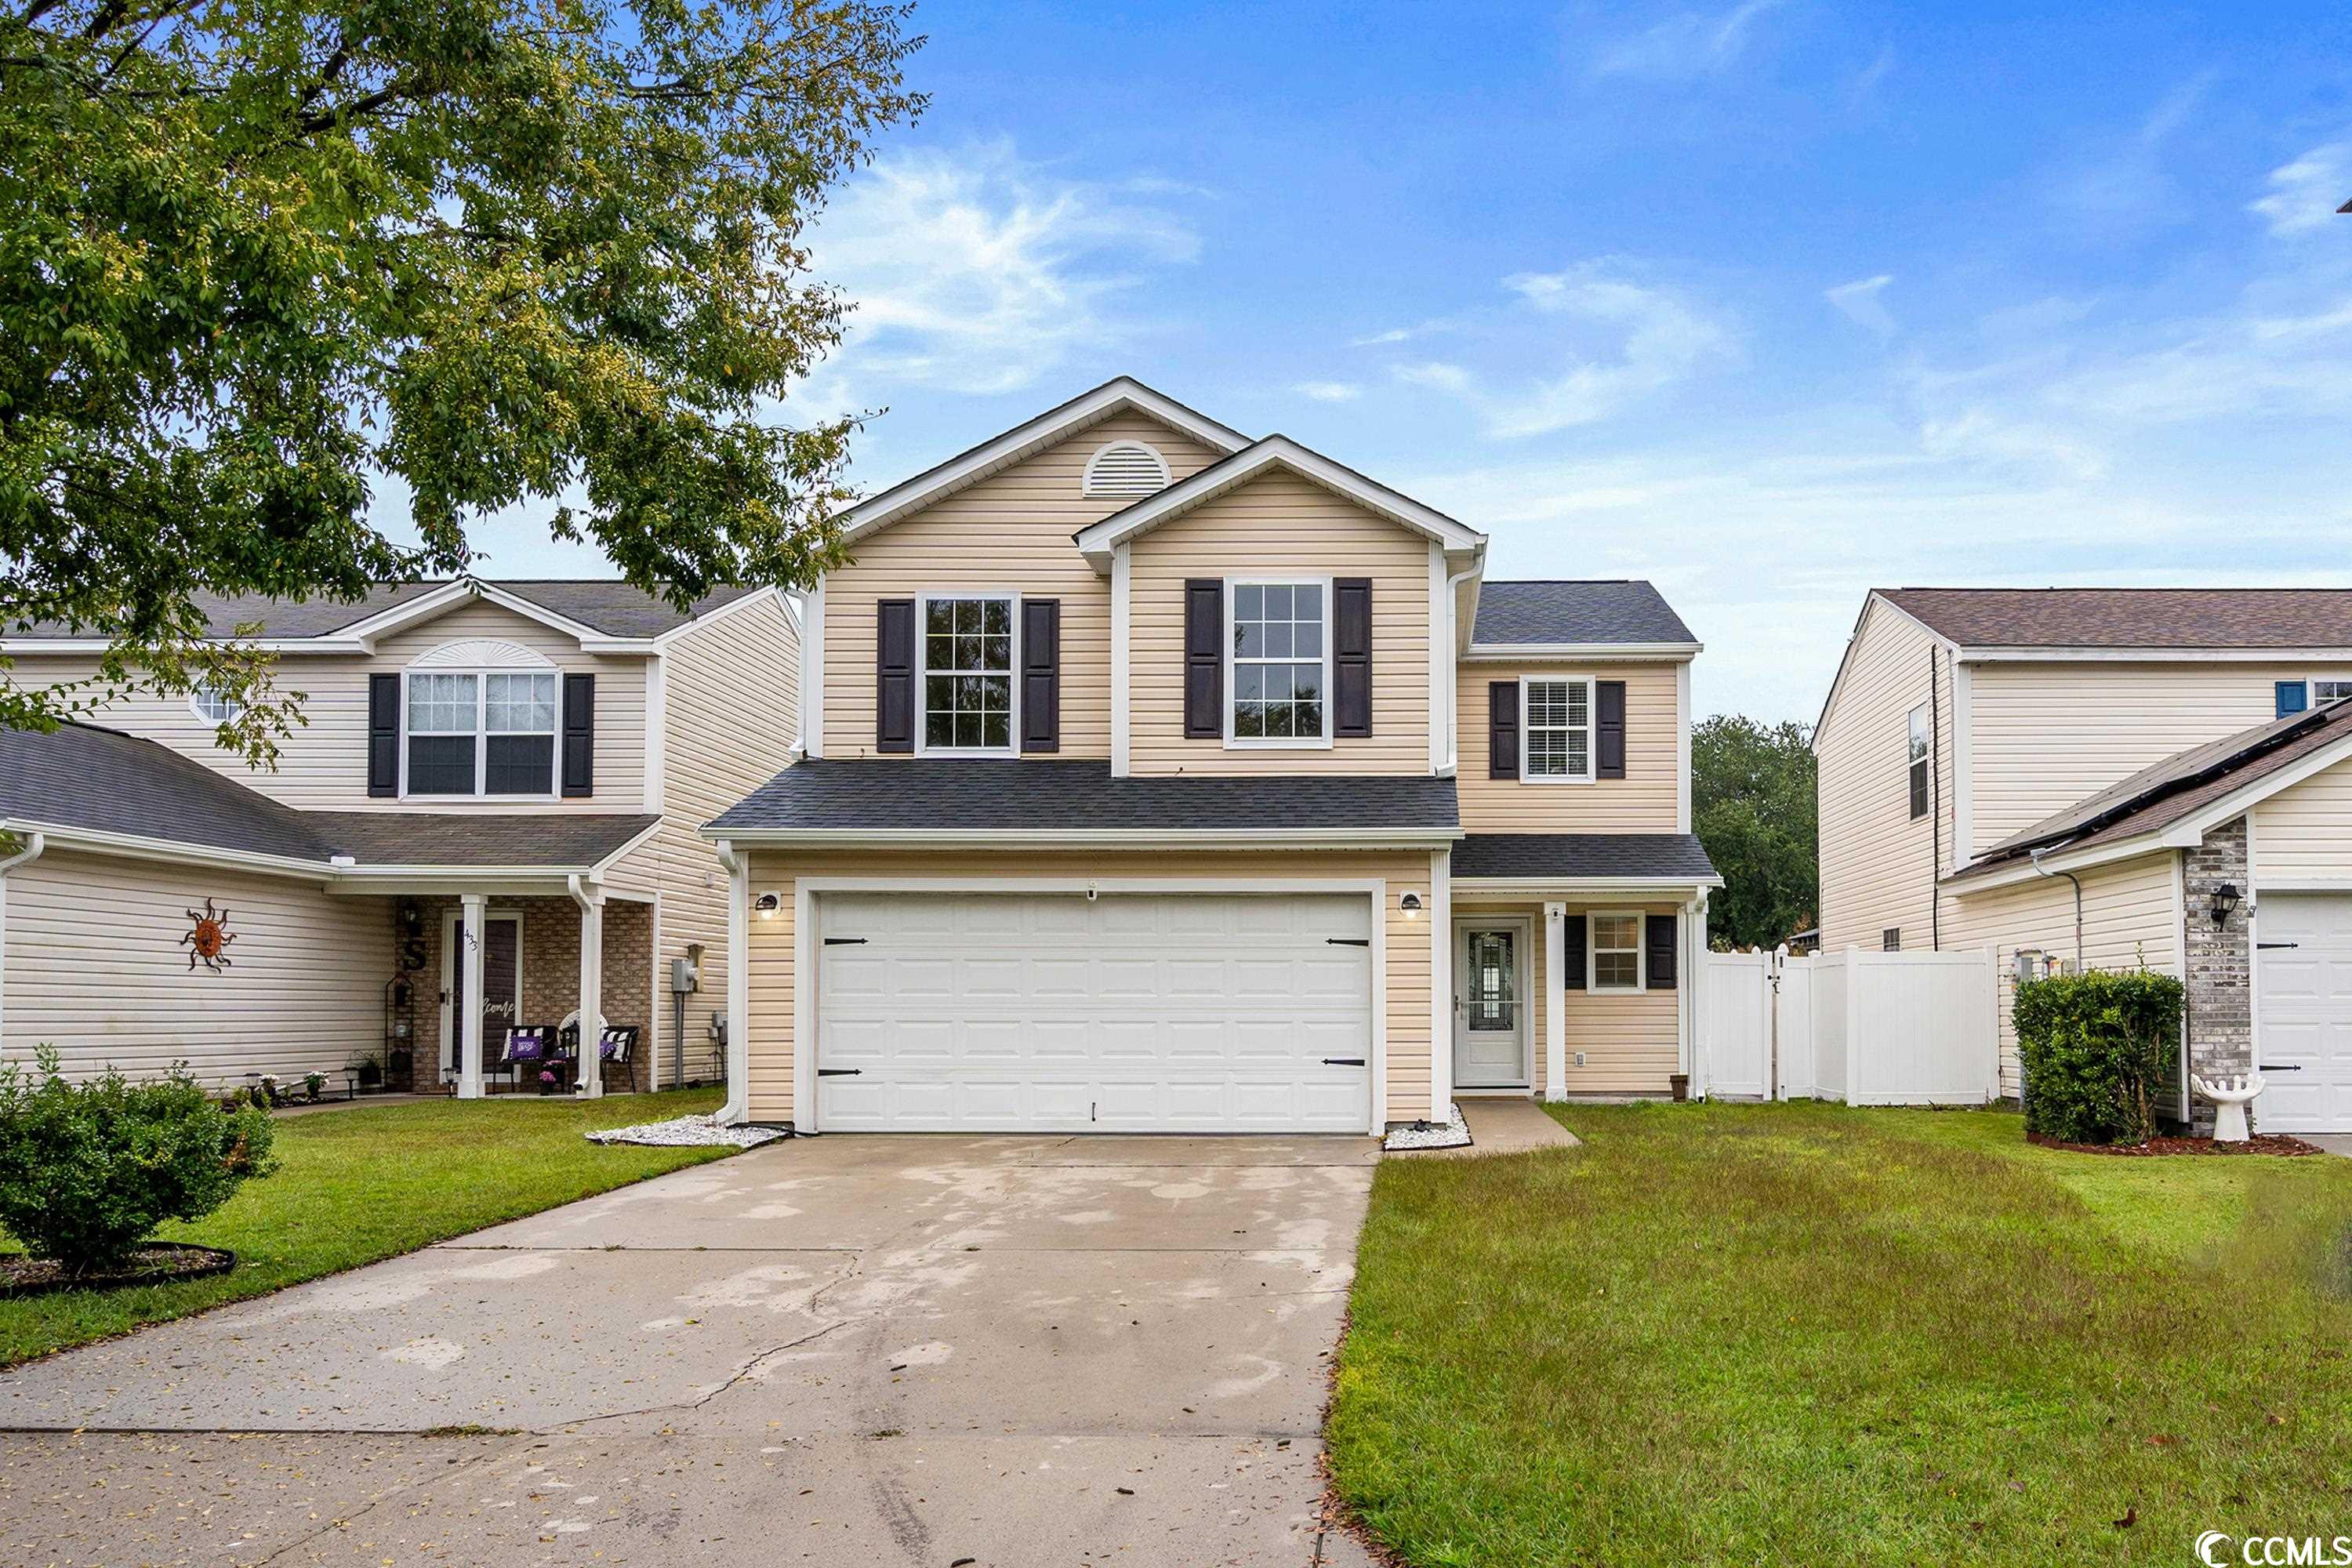 open houses:friday,10/6 from 11am -1pm  and sat. 10/7 noon -2pm spacious four bedroom, 2 1/2 bath home (valley forge floorplan) in the desirable avalon community at carolina forest with its convenient location and many amenities and activities. new hvac system in 2020. new roof in 2023. relax in the spacious great room with an inviting fireplace.   the home has been recently renovated with so many upgrades: luxury porcelain tile flooring throughout the main areas (even in the garage, which is also insulated and has ample shelving) crown molding throughout, beautifully smooth ceilings. in 2022 the kitchen was fully remodeled with marble countertops, stainless appliances, gas stove and large farm sink - perfect setup for any cook and great for entertaining. next to the kitchen is a formal dining room but the kitchen also has a breakfast nook - plenty of space for your family to have meals. also on the first floor is a versatile office space that offers privacy and convenience and can also be a carolina room. outside, enjoy the privacy of a completely fenced yard - great for your pets and loved ones. there is  an outdoor shed/storage area, ensuring ample space for your belongings while keeping them easily accessible.  all measurements and square footage are approximate and not guaranteed. the buyer is responsible for verification.